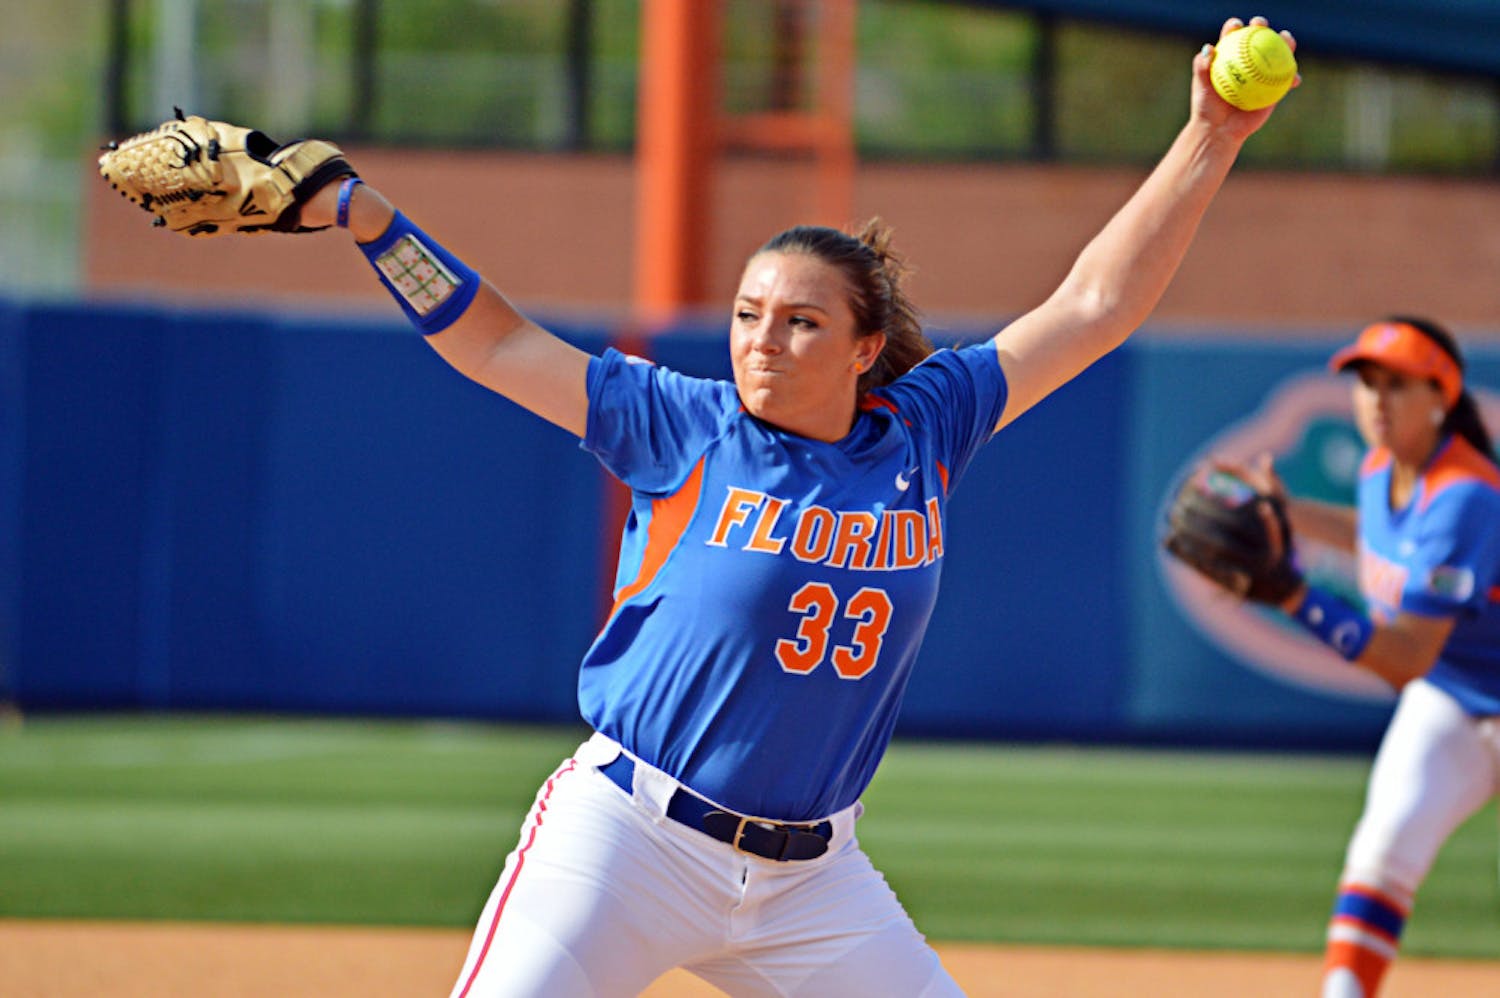 Delanie Gourley pitches during Florida's 7-6 win against Auburn on April 5 at Katie Seashole Pressly Stadium. Gourley threw her first collegiate no-hitter in UF's 8-0 win against FAMU on Friday in the NCAA Regionals.